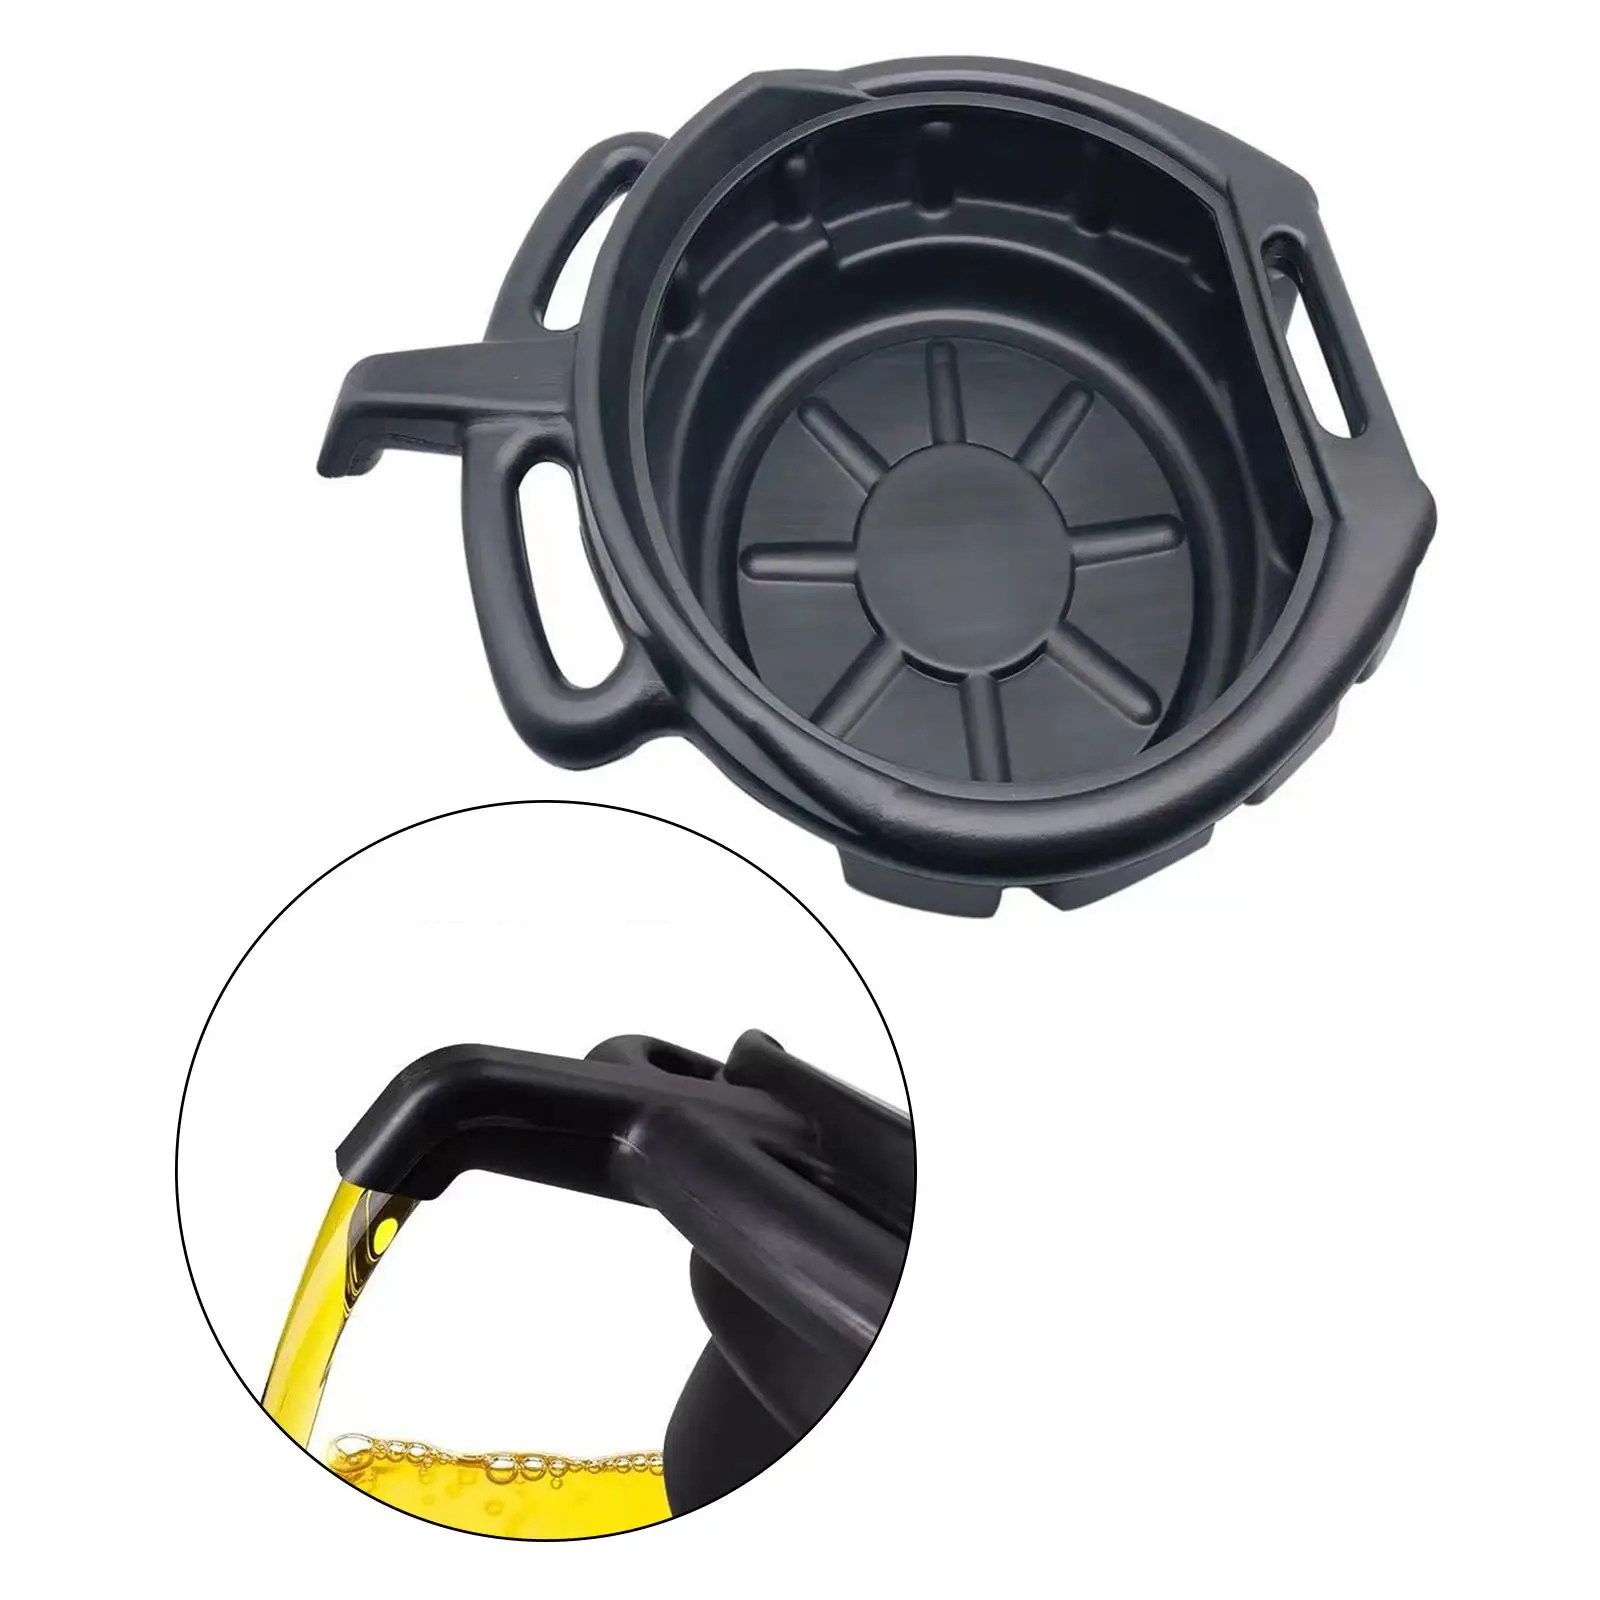 Oil Drain Can Leak Easy to Use PP Durable Garage Tool Fluted Collect Pan for Truck Car Fuel Fluid Garage Tool Garage